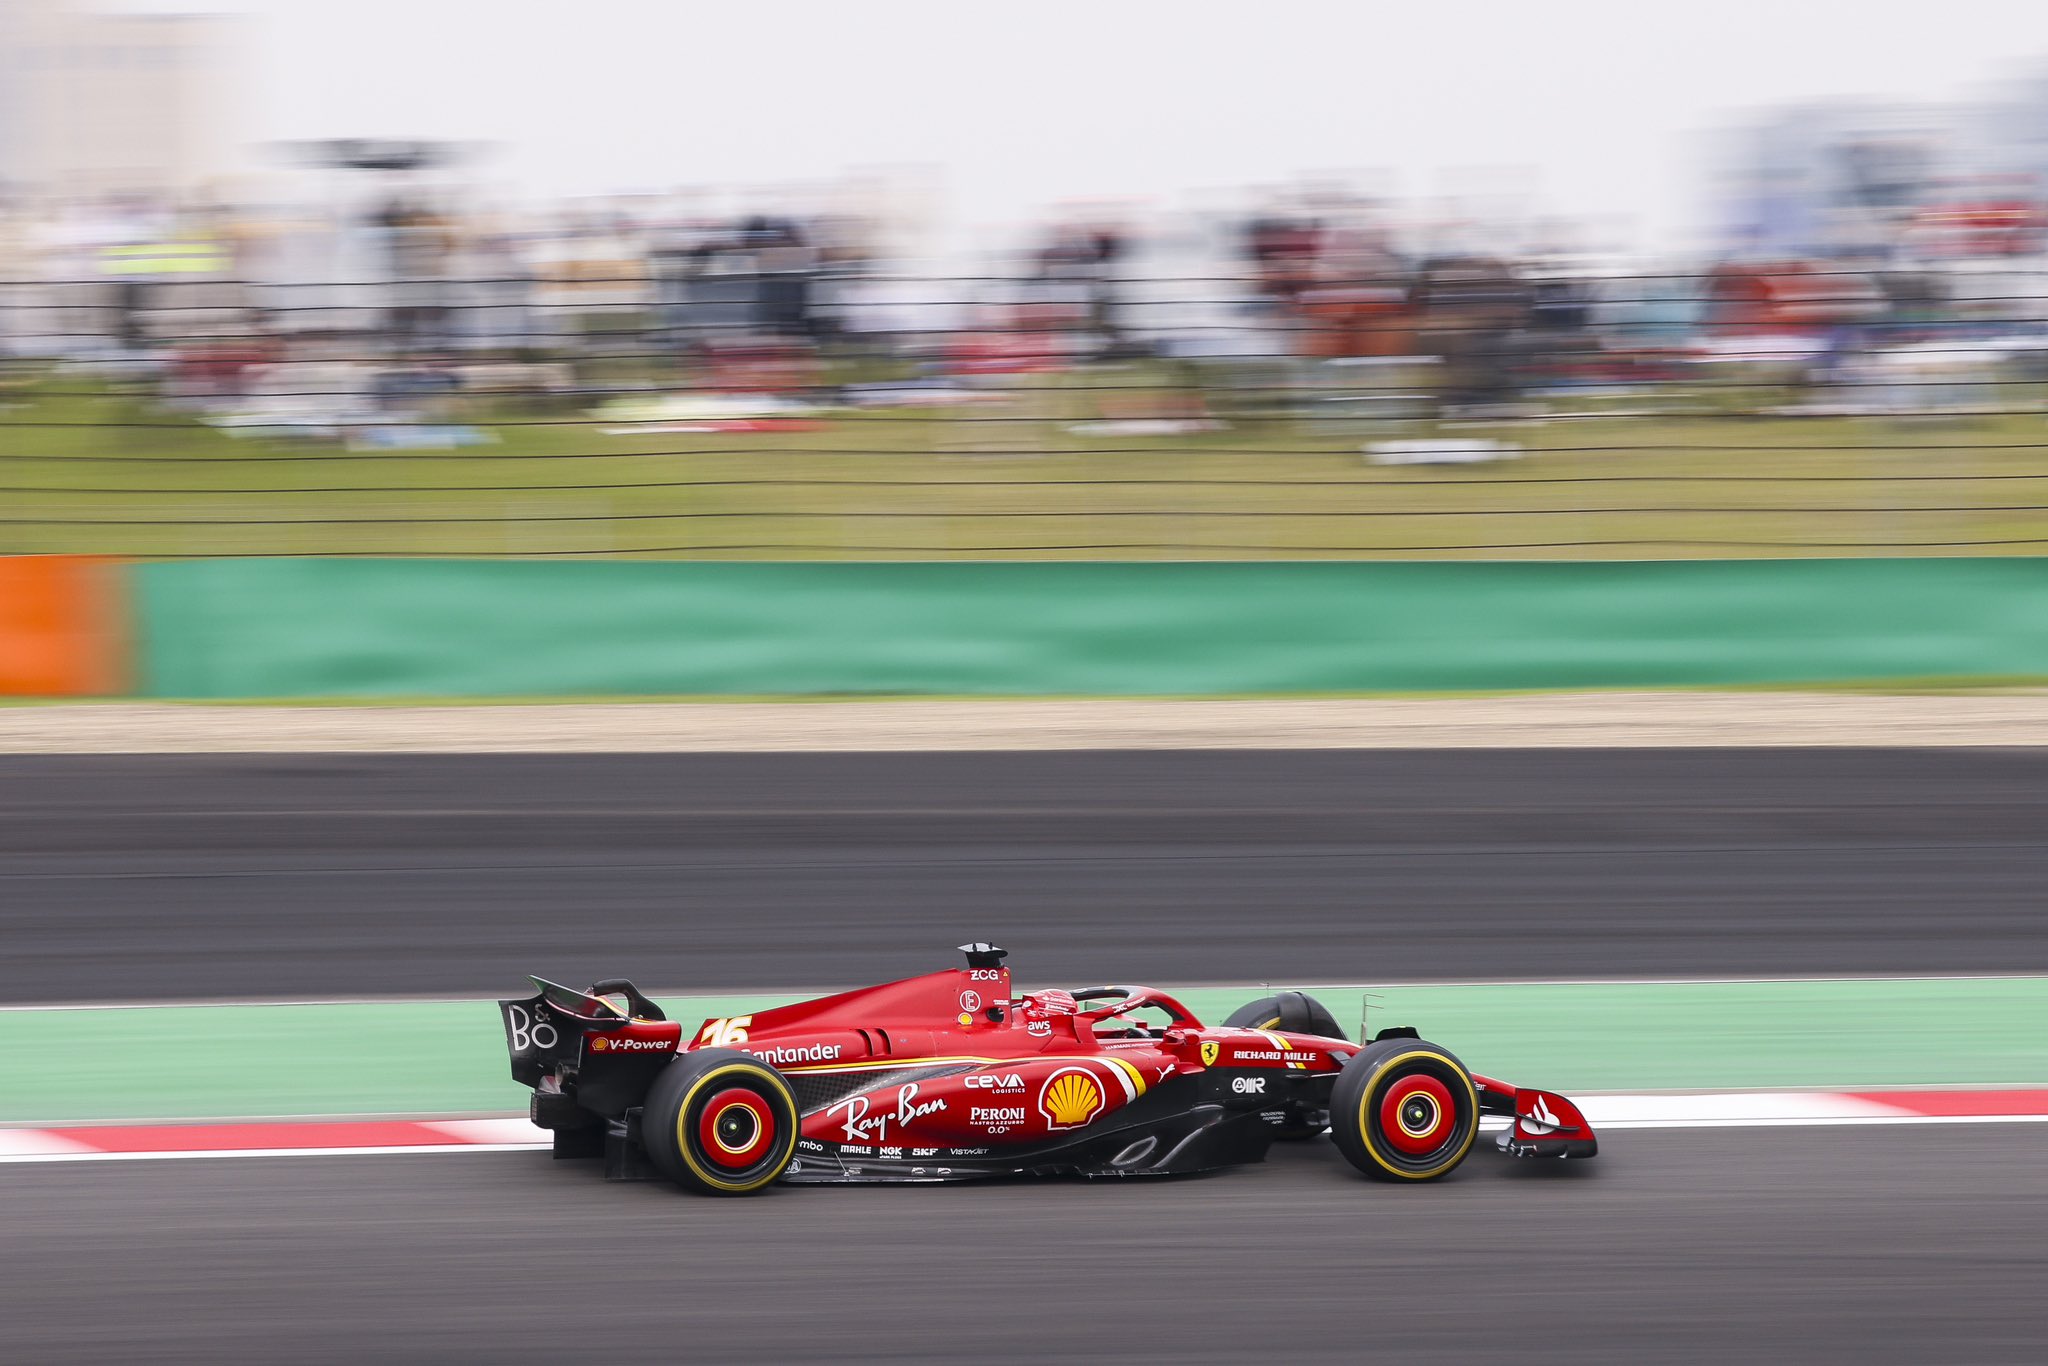 F1, Chinese GP: here are the results of the race